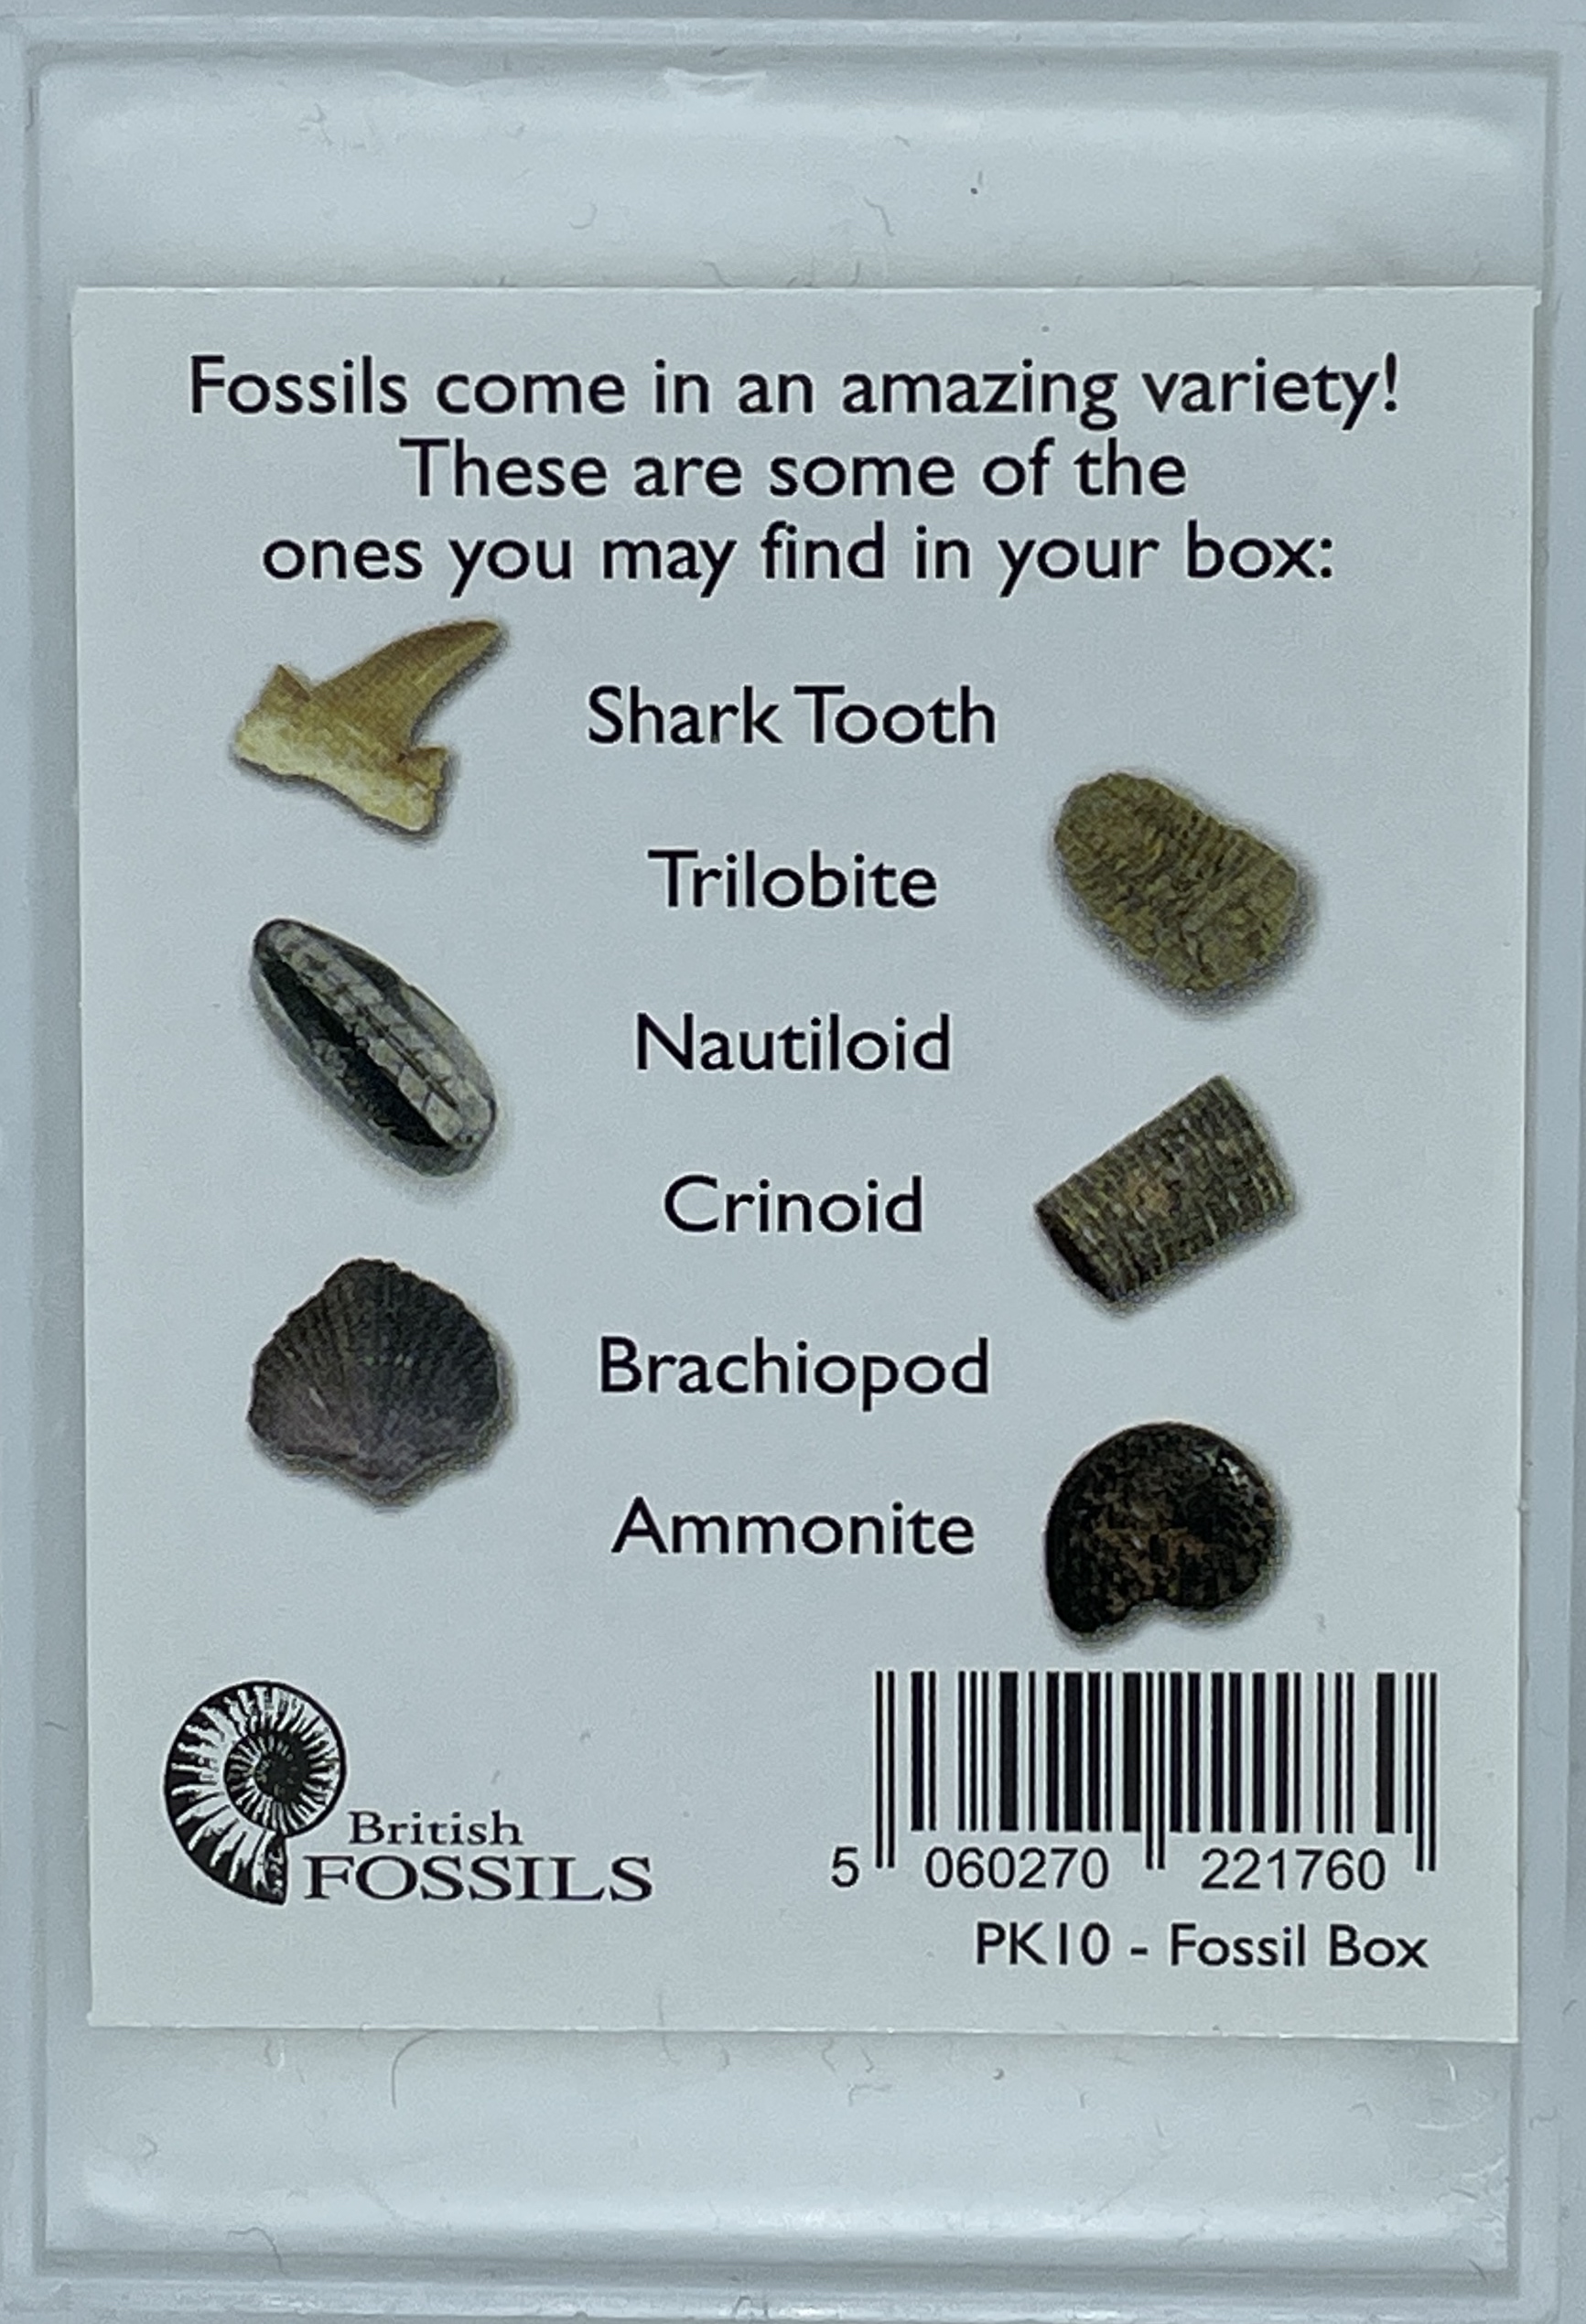 Back of the Fossil Box